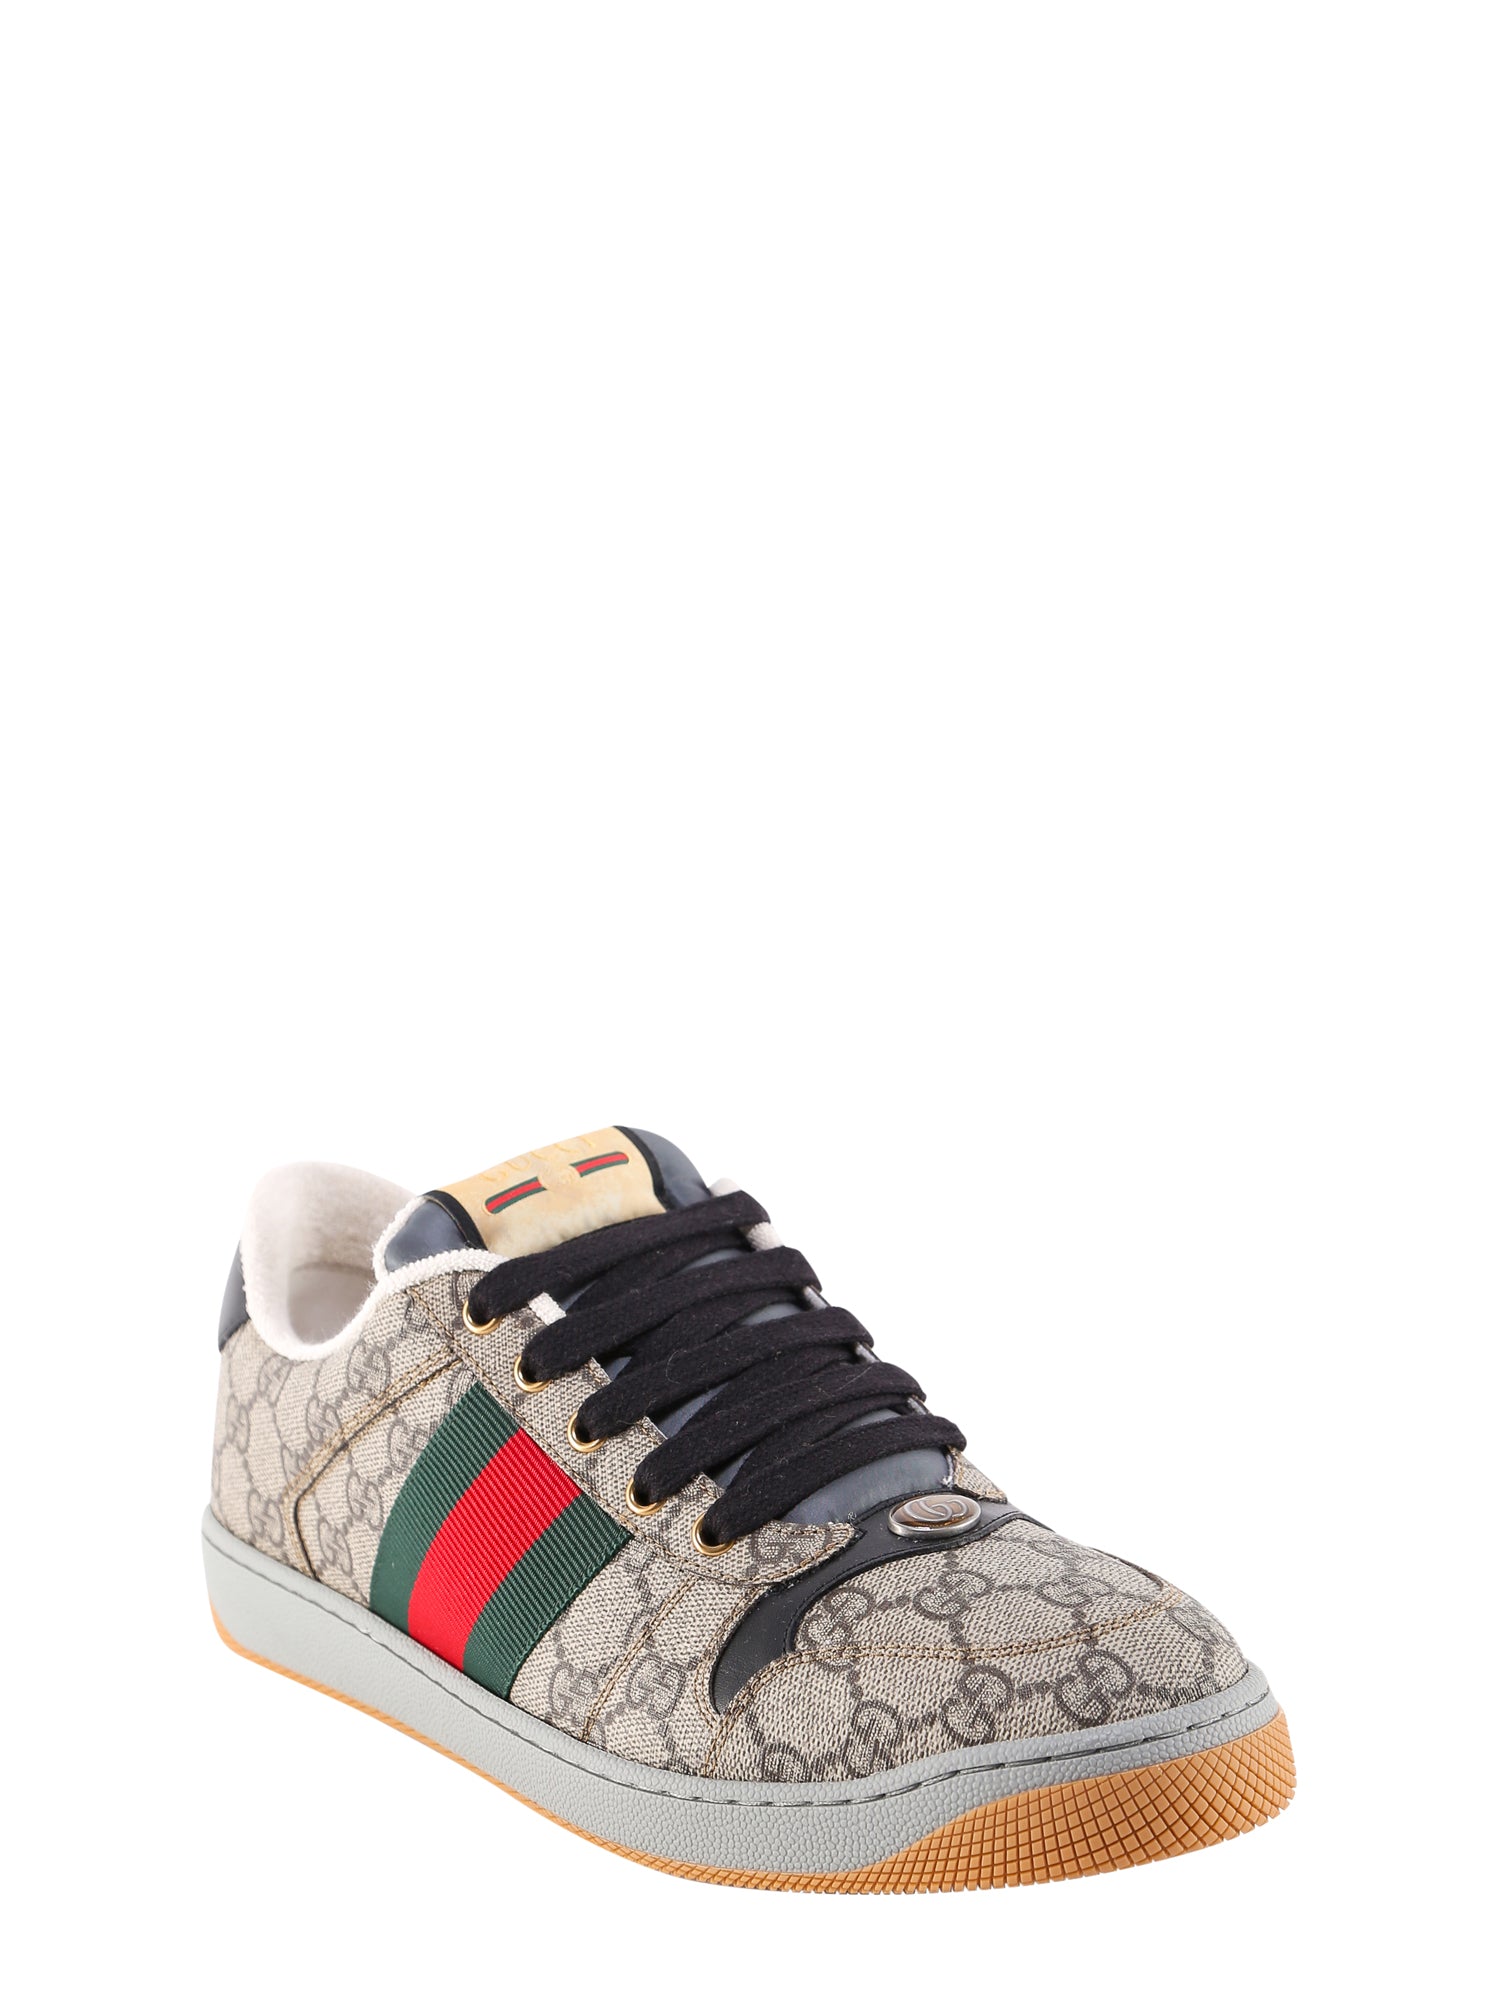 Shop Gucci Screener Gg Supreme Fabric And Leather Sneakers